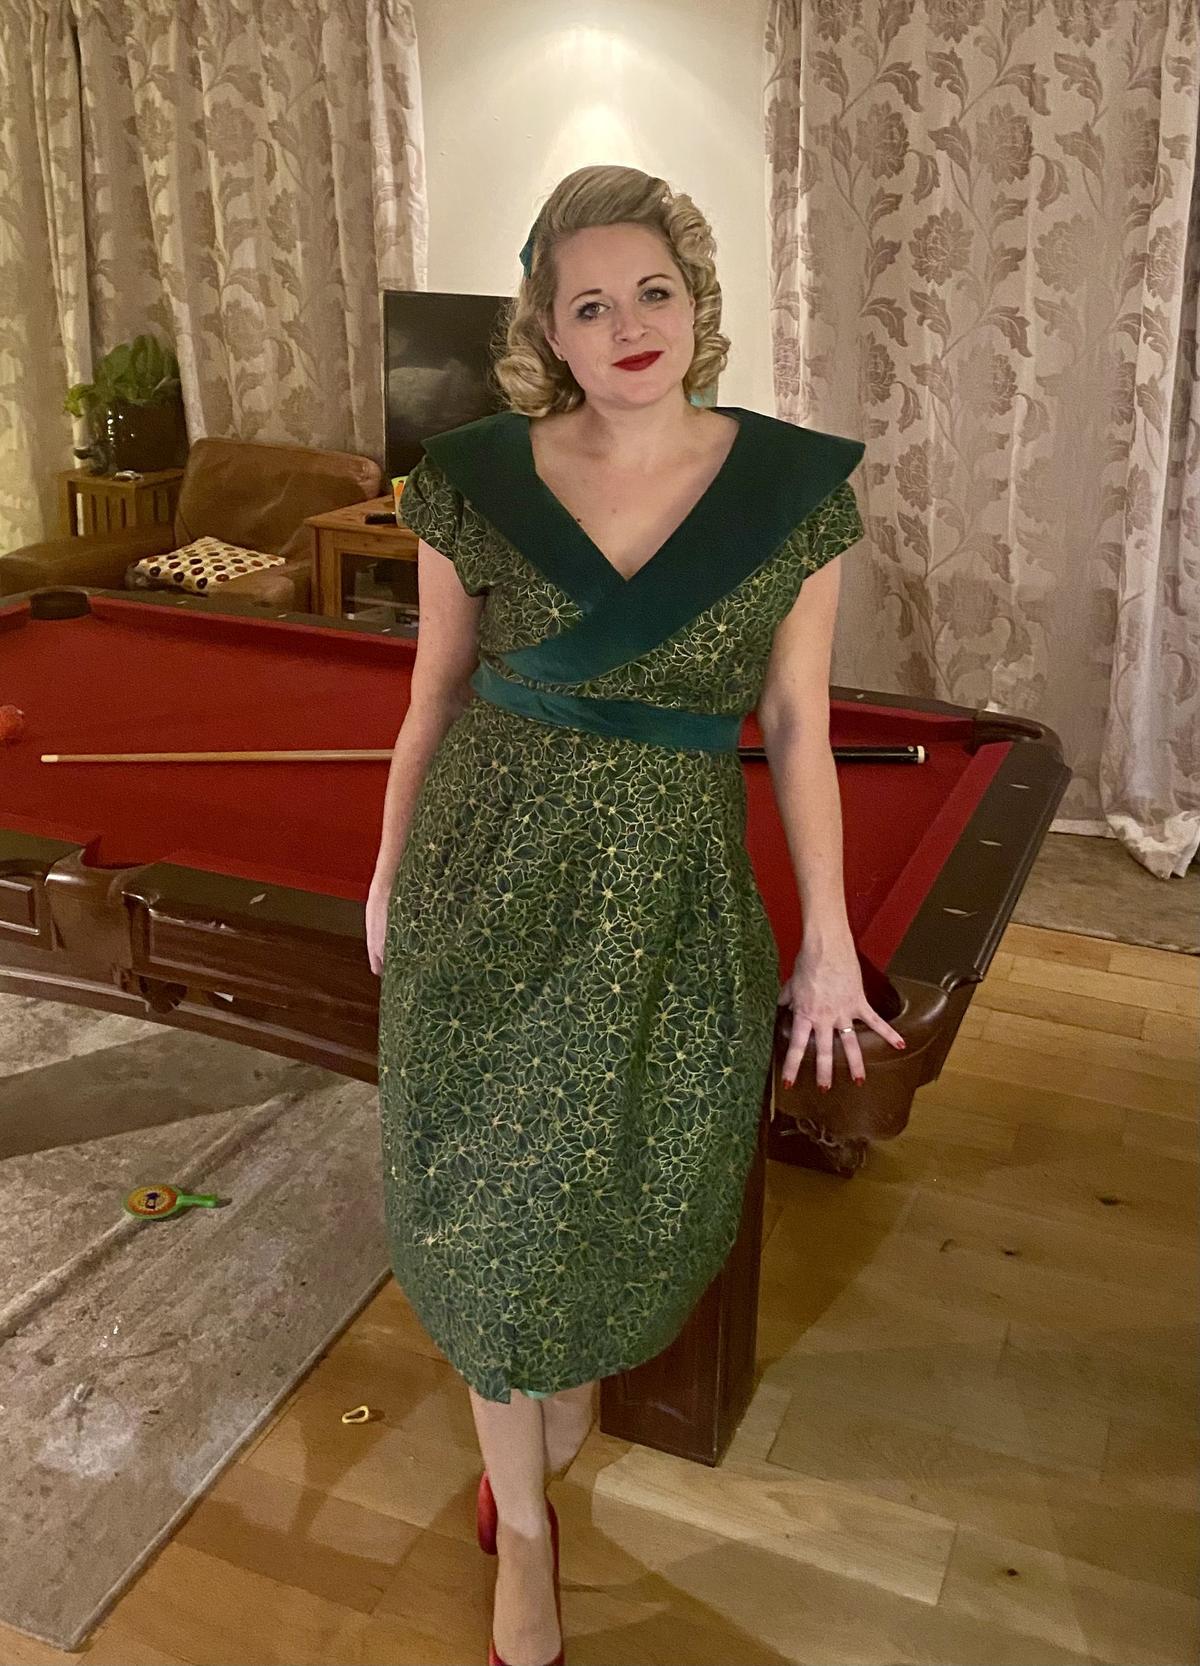 Rosie wearing a handmade dress made from a Butterick pattern. (Kennedy News and Media)